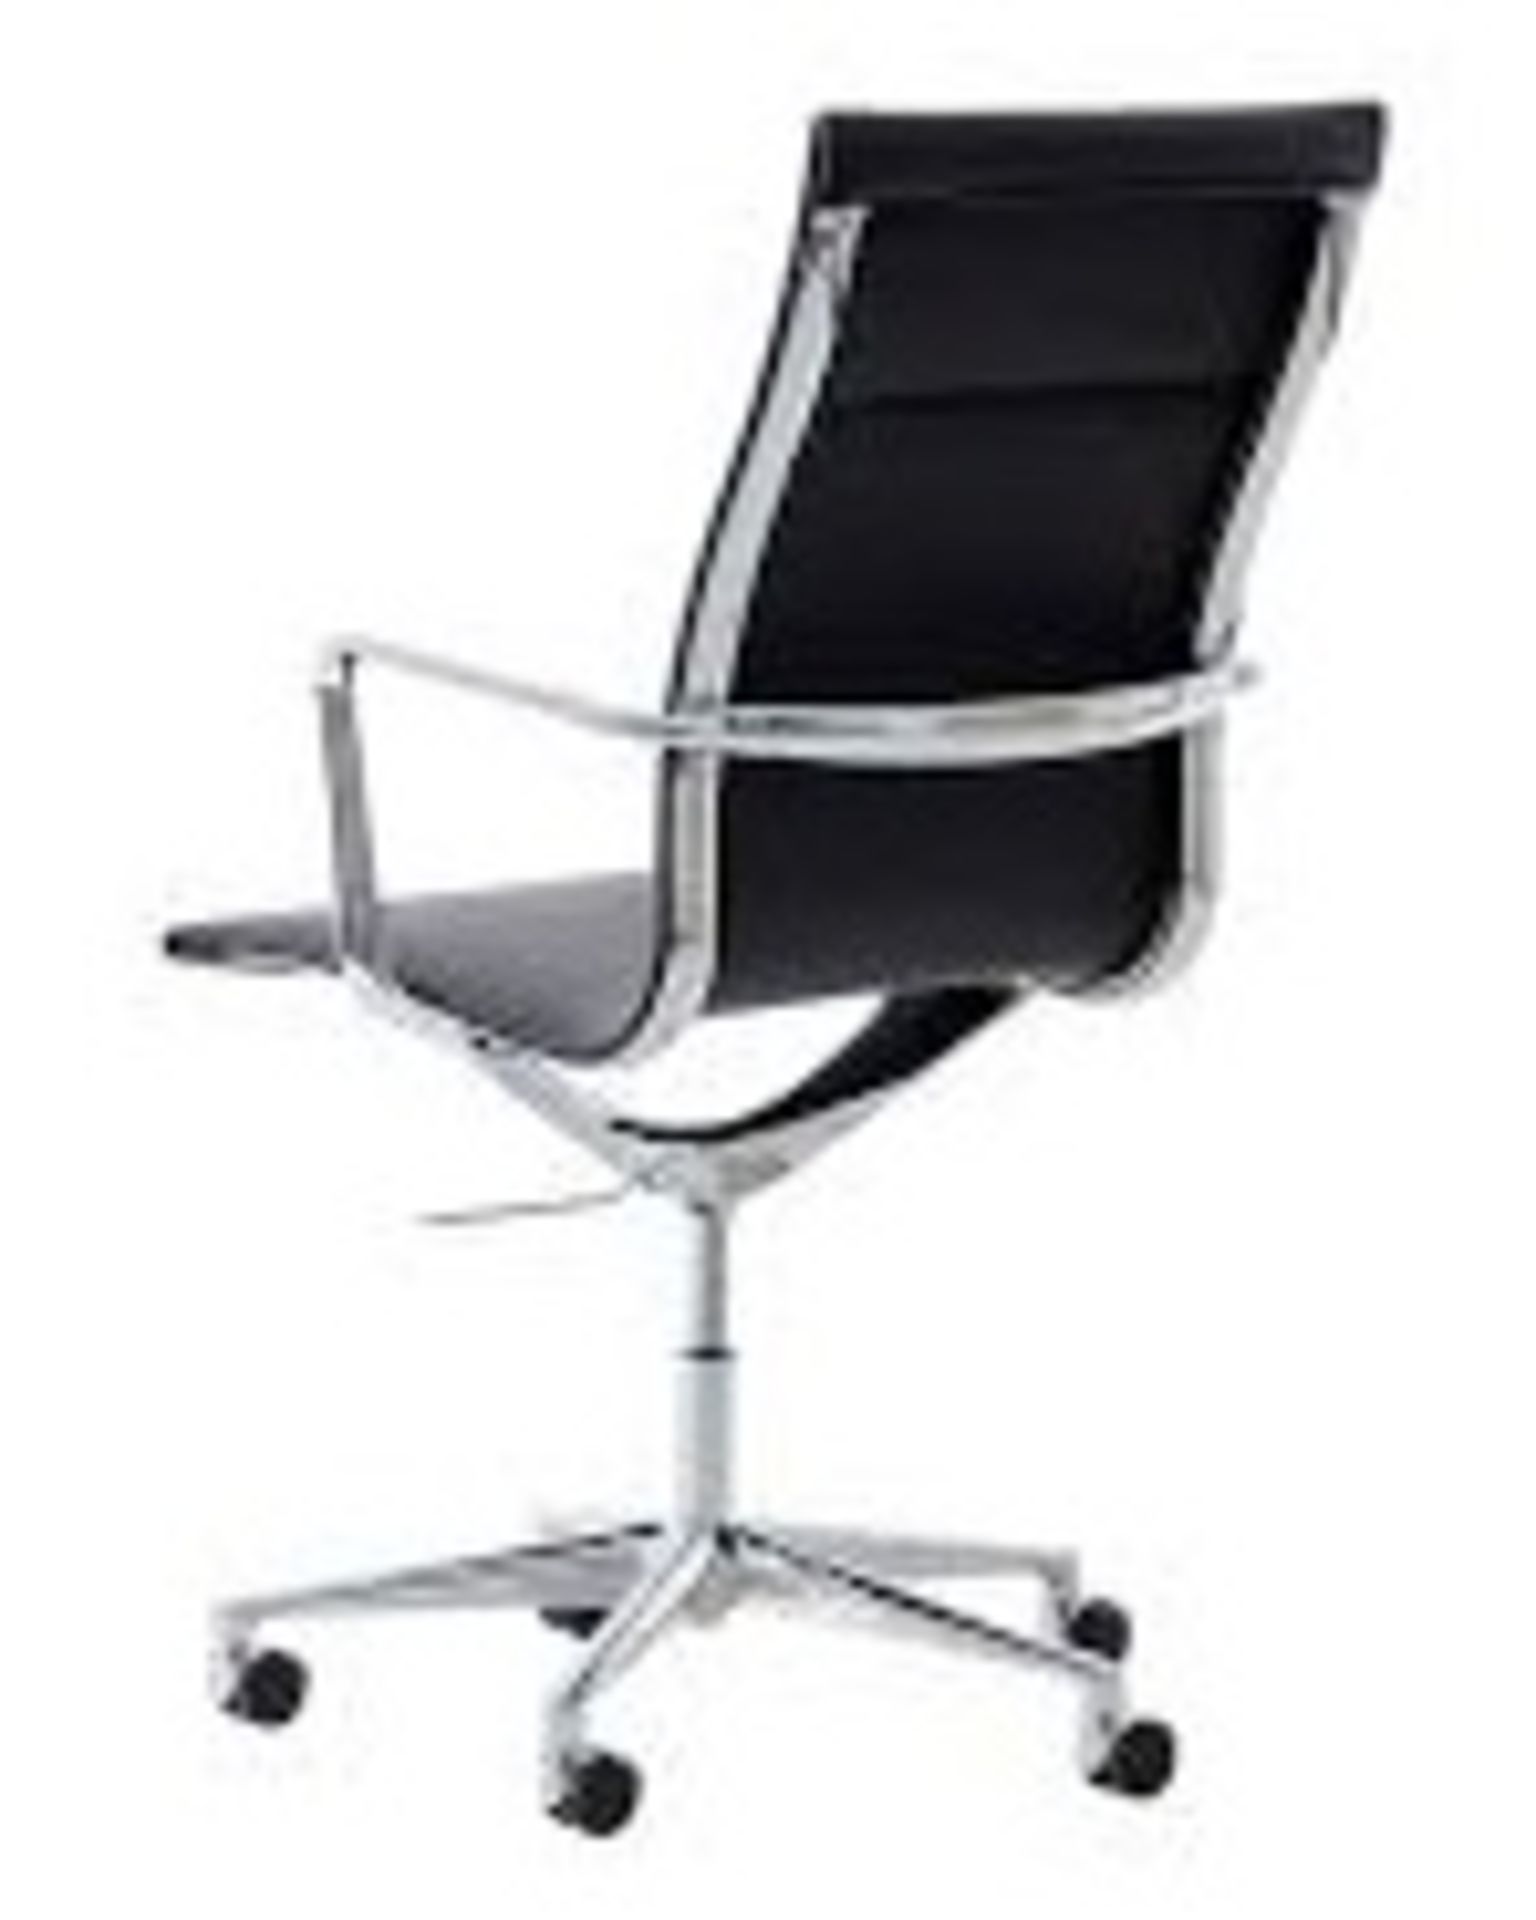 1 x LINEAR Eames-Inspired High Back Office Chair In Black Leather- New Boxed Stock - RRP £350.00 - Image 2 of 2